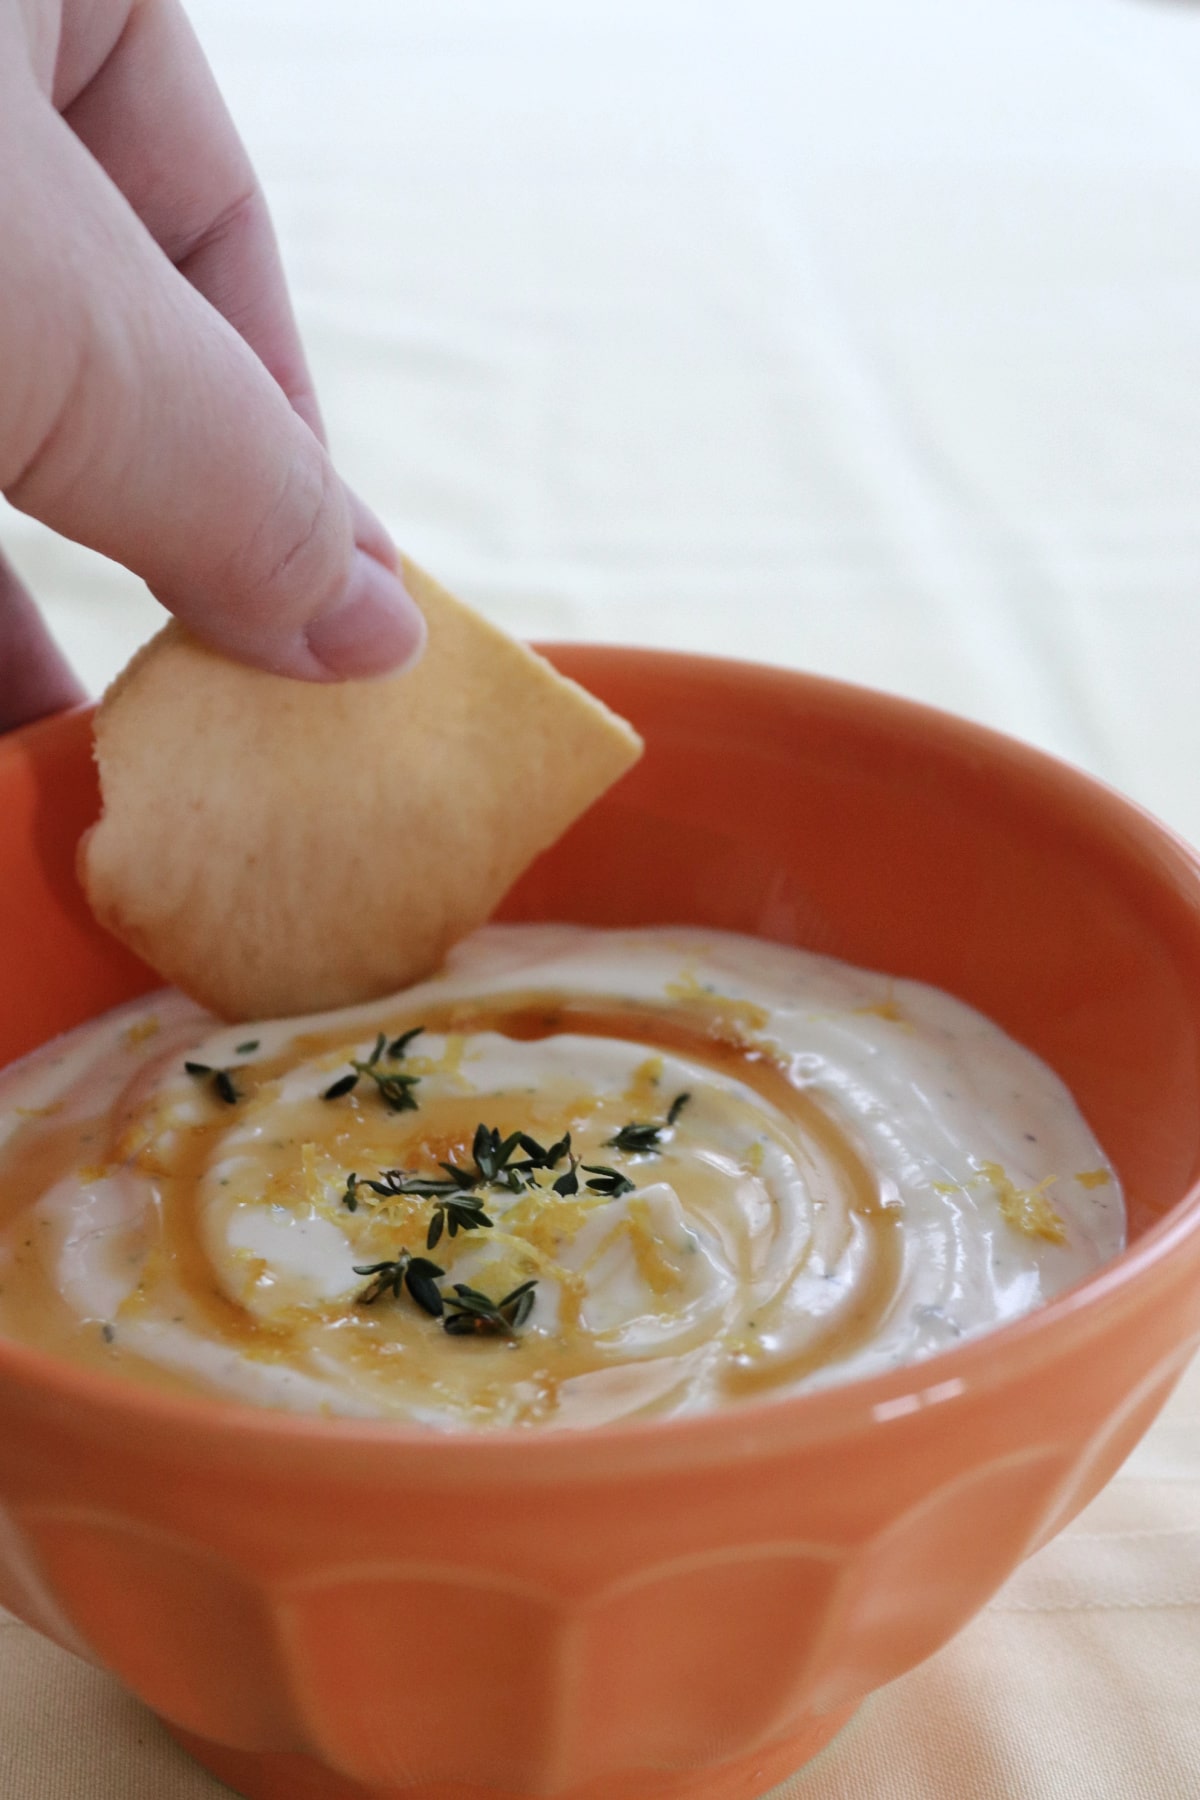 A hand dipping a pita chip into whipped honey ricotta.